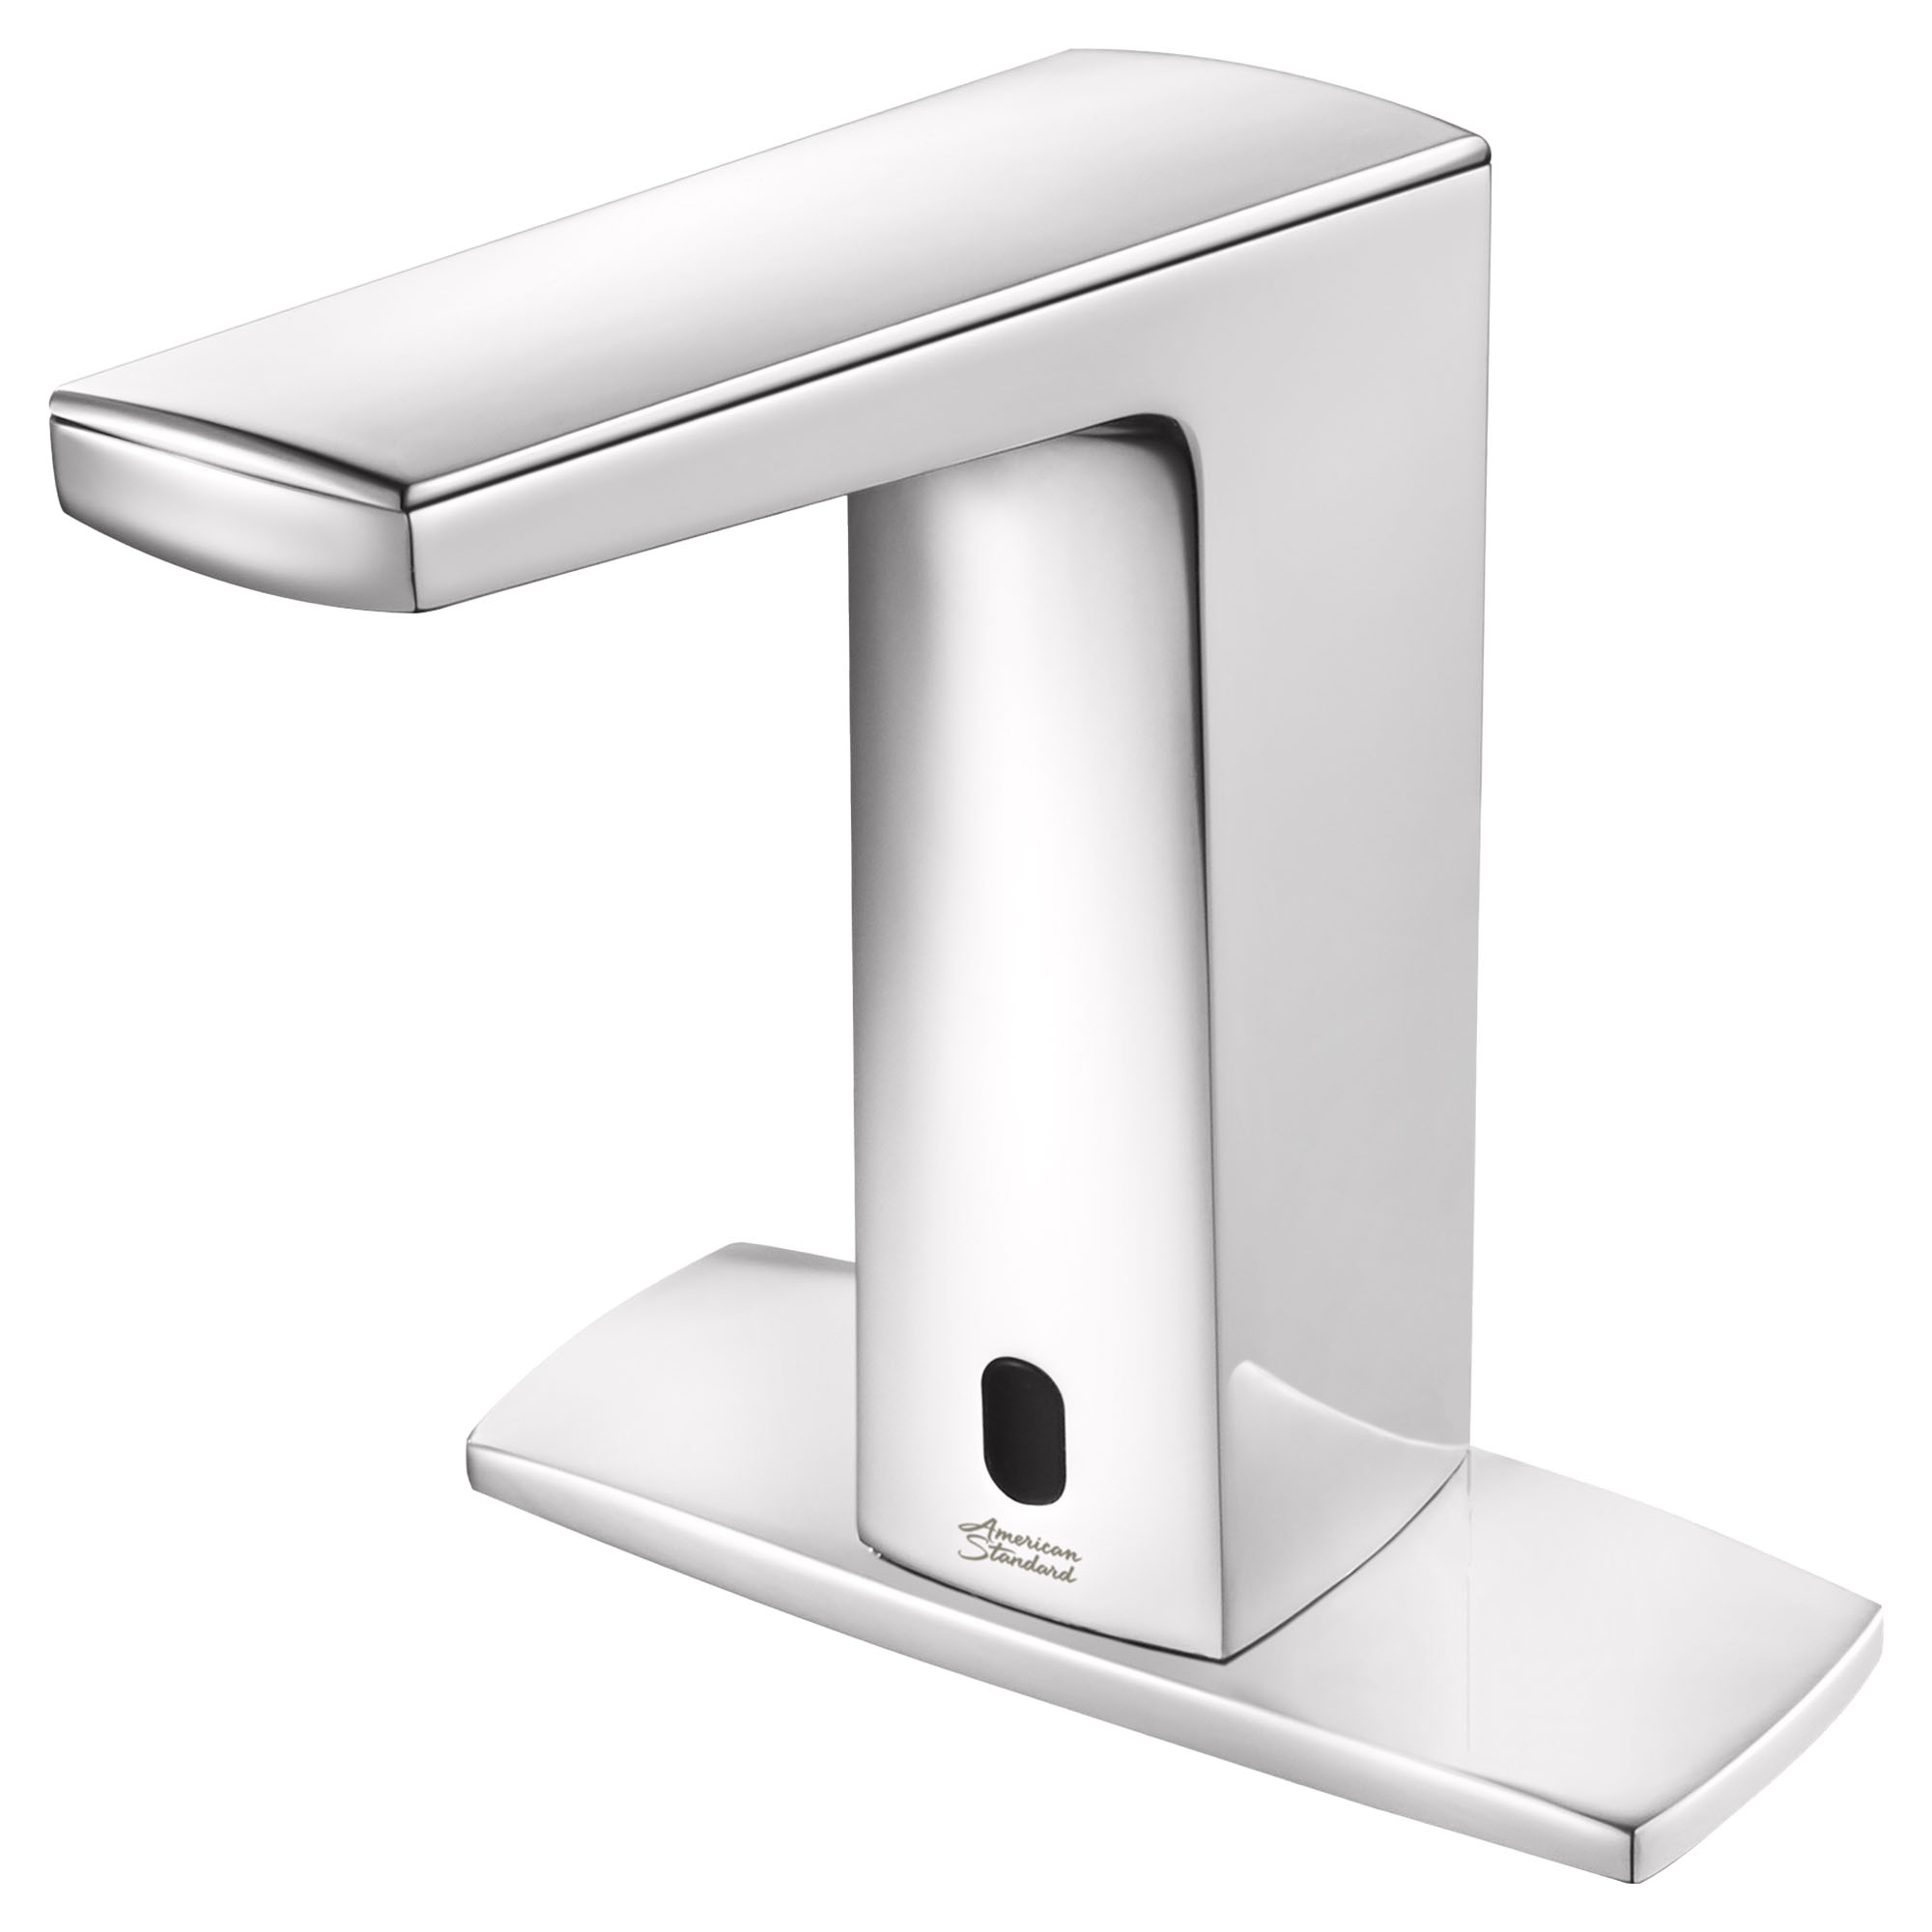 Paradigm™ Selectronic™ Touchless Faucet, Base Model, 1.5 gpm/5.7 Lpm